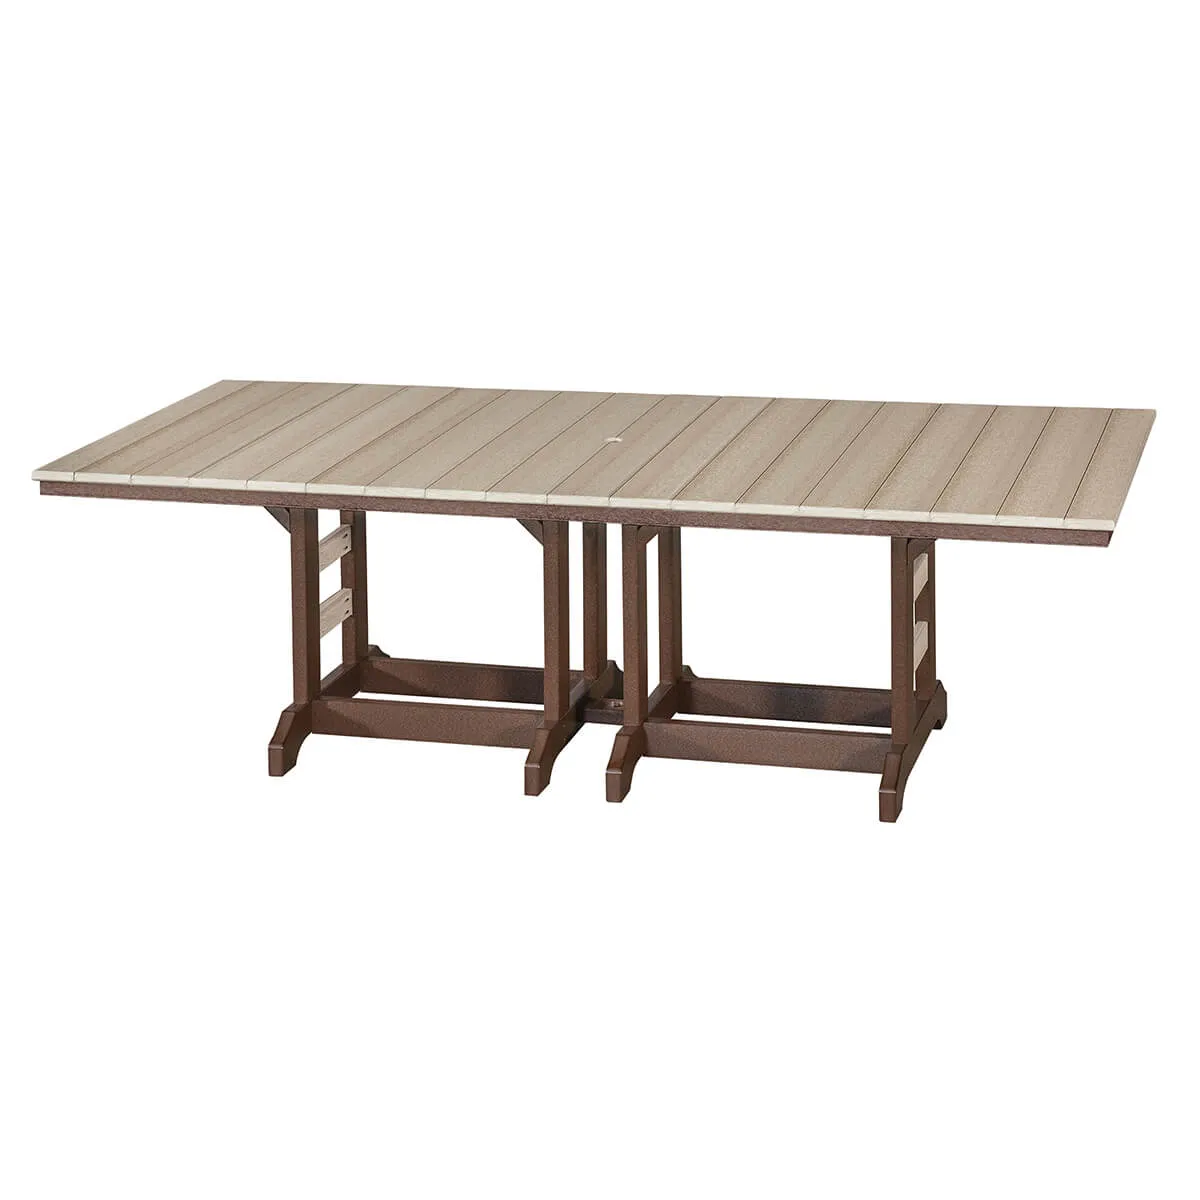 42 Inch x 96 Inch Table